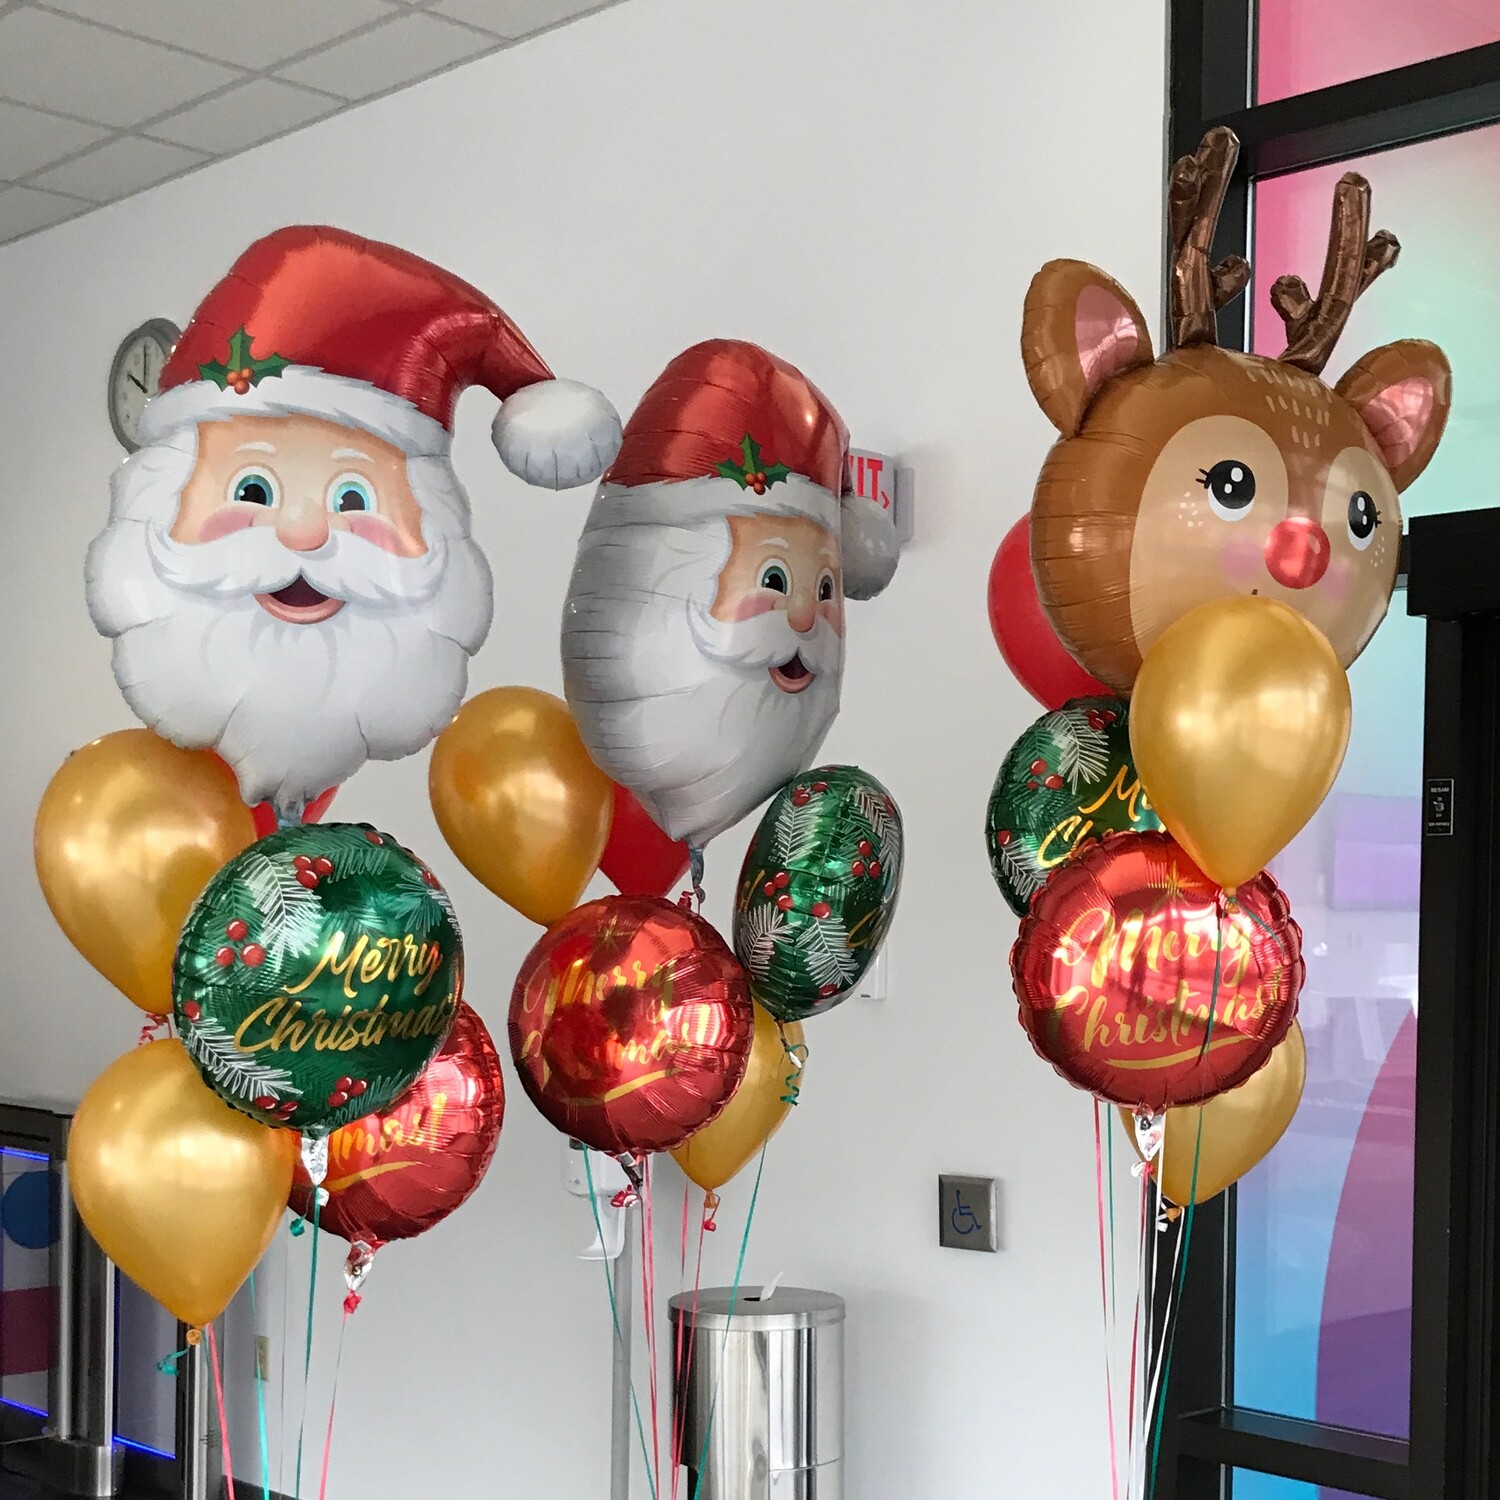 Mrs. Claus delivers balloons